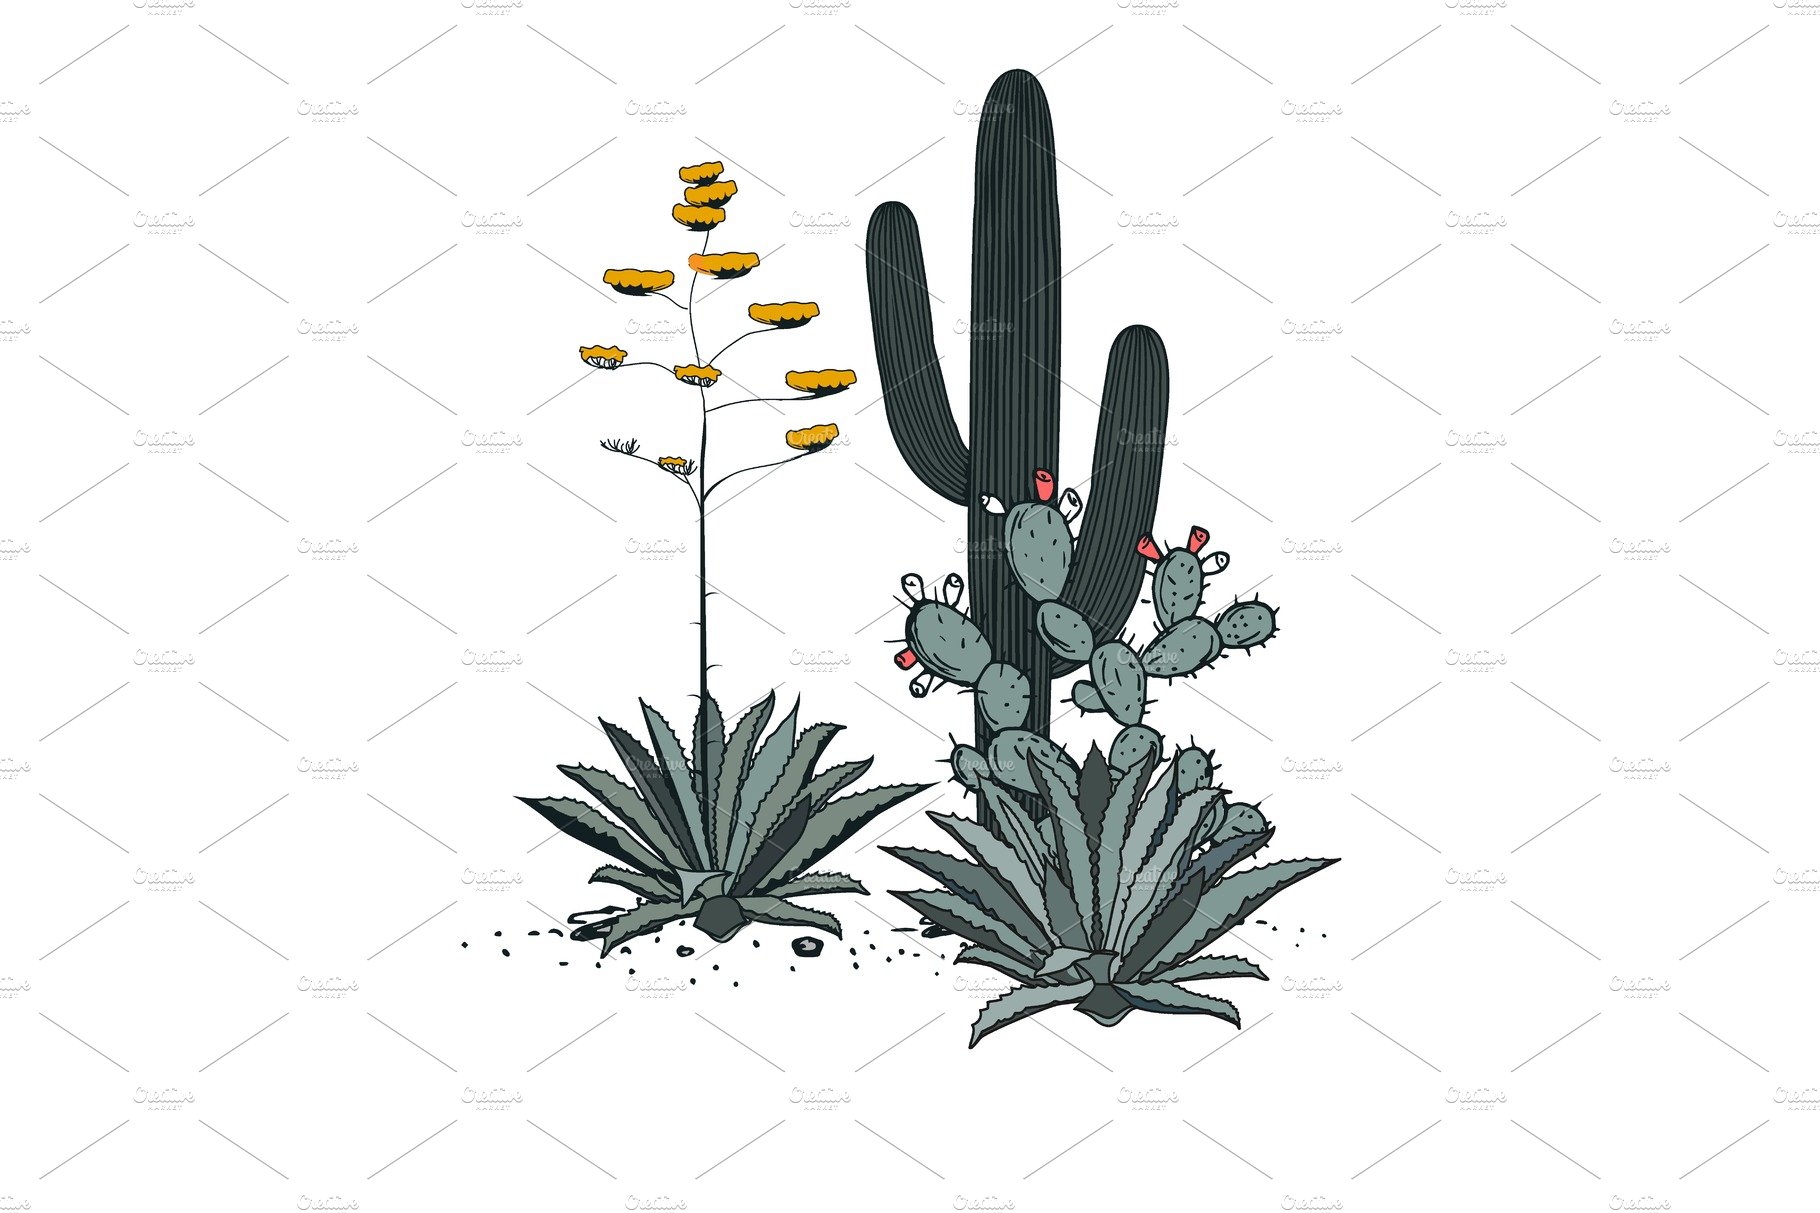 Cactus and flowers on a white background.